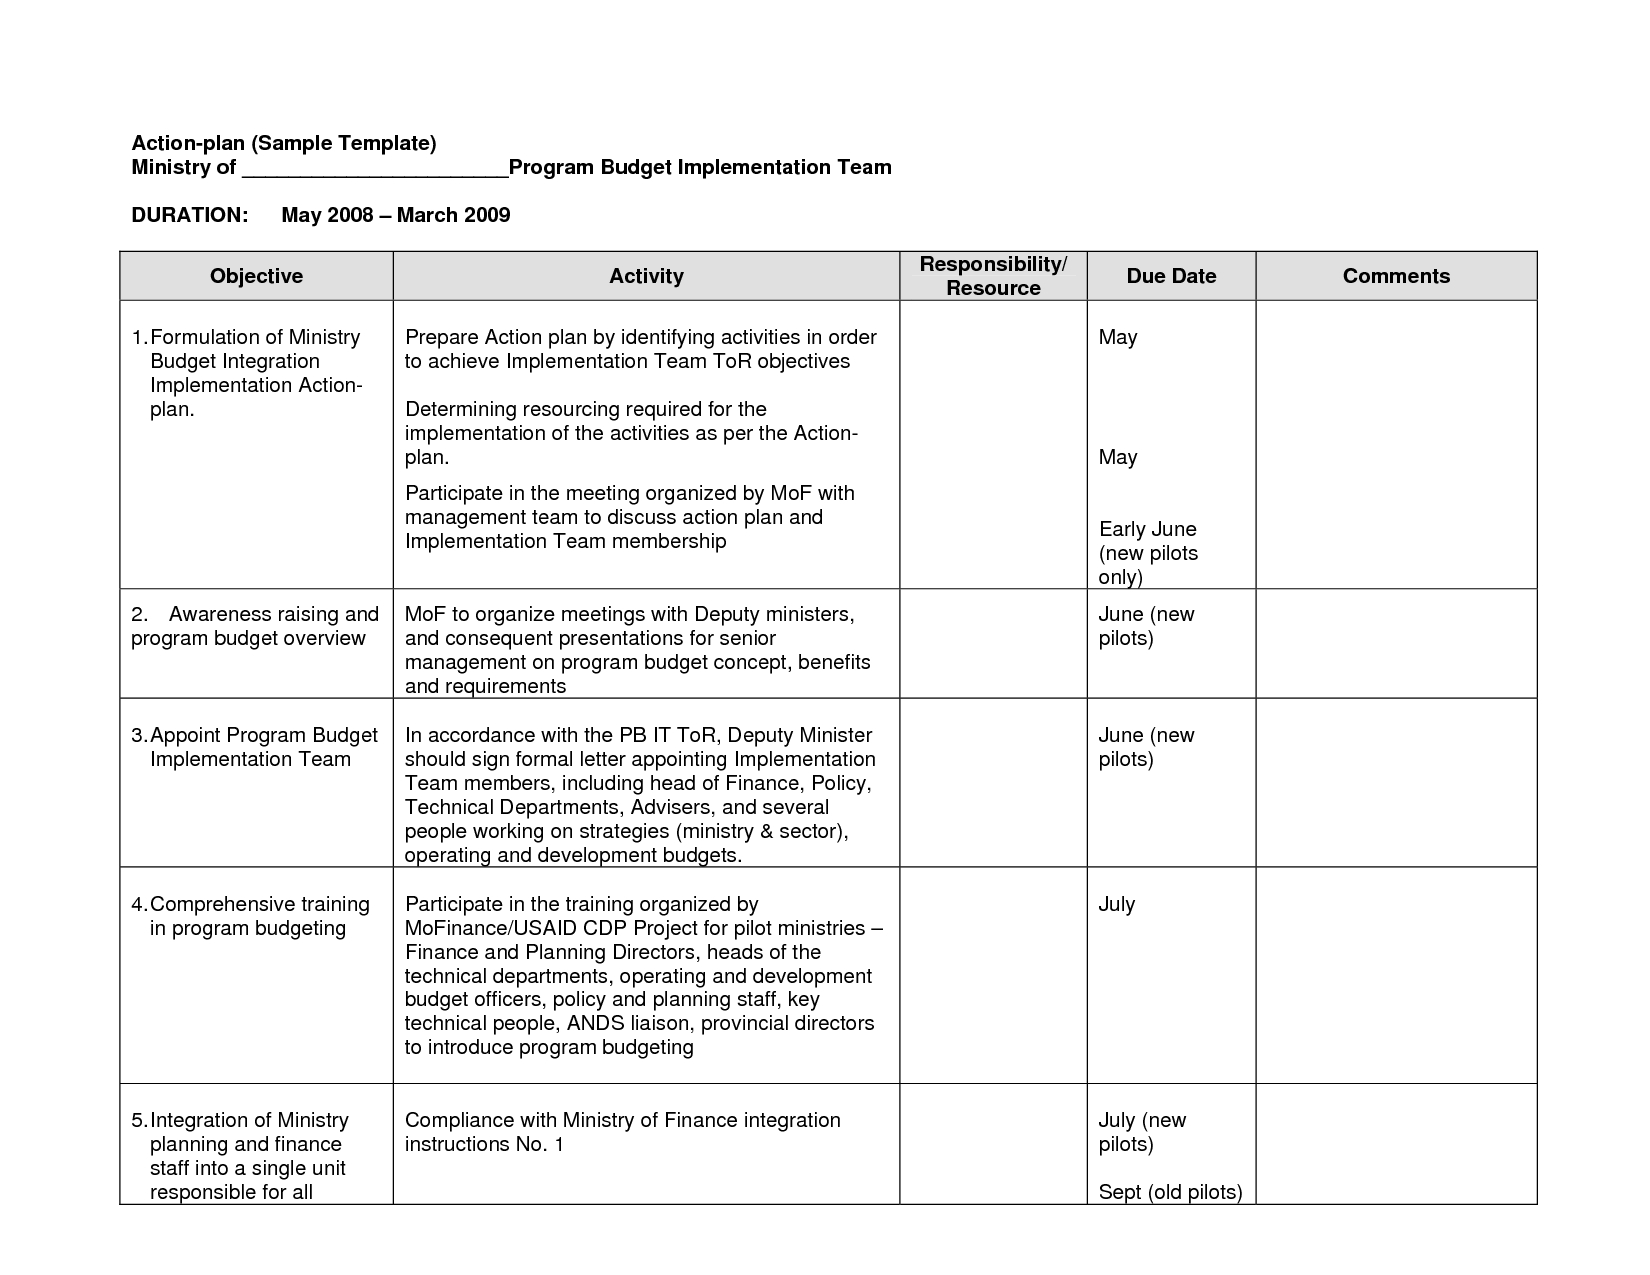 Action Plan (Sample Template) | Monitoring And Evaluation Throughout Strategic Management Report Template